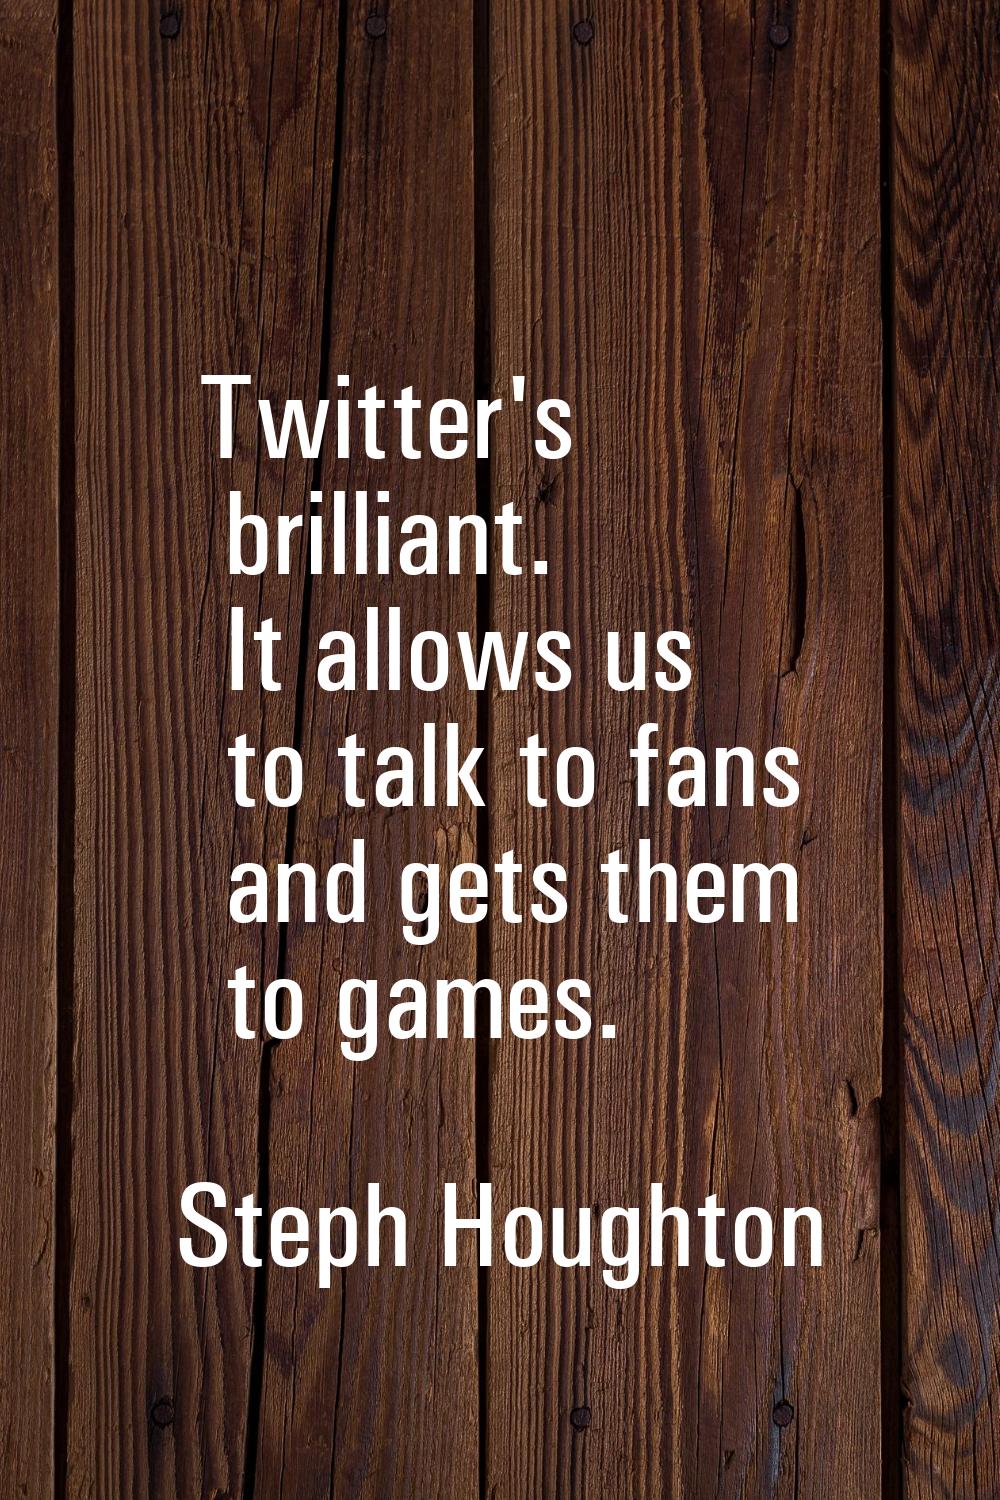 Twitter's brilliant. It allows us to talk to fans and gets them to games.